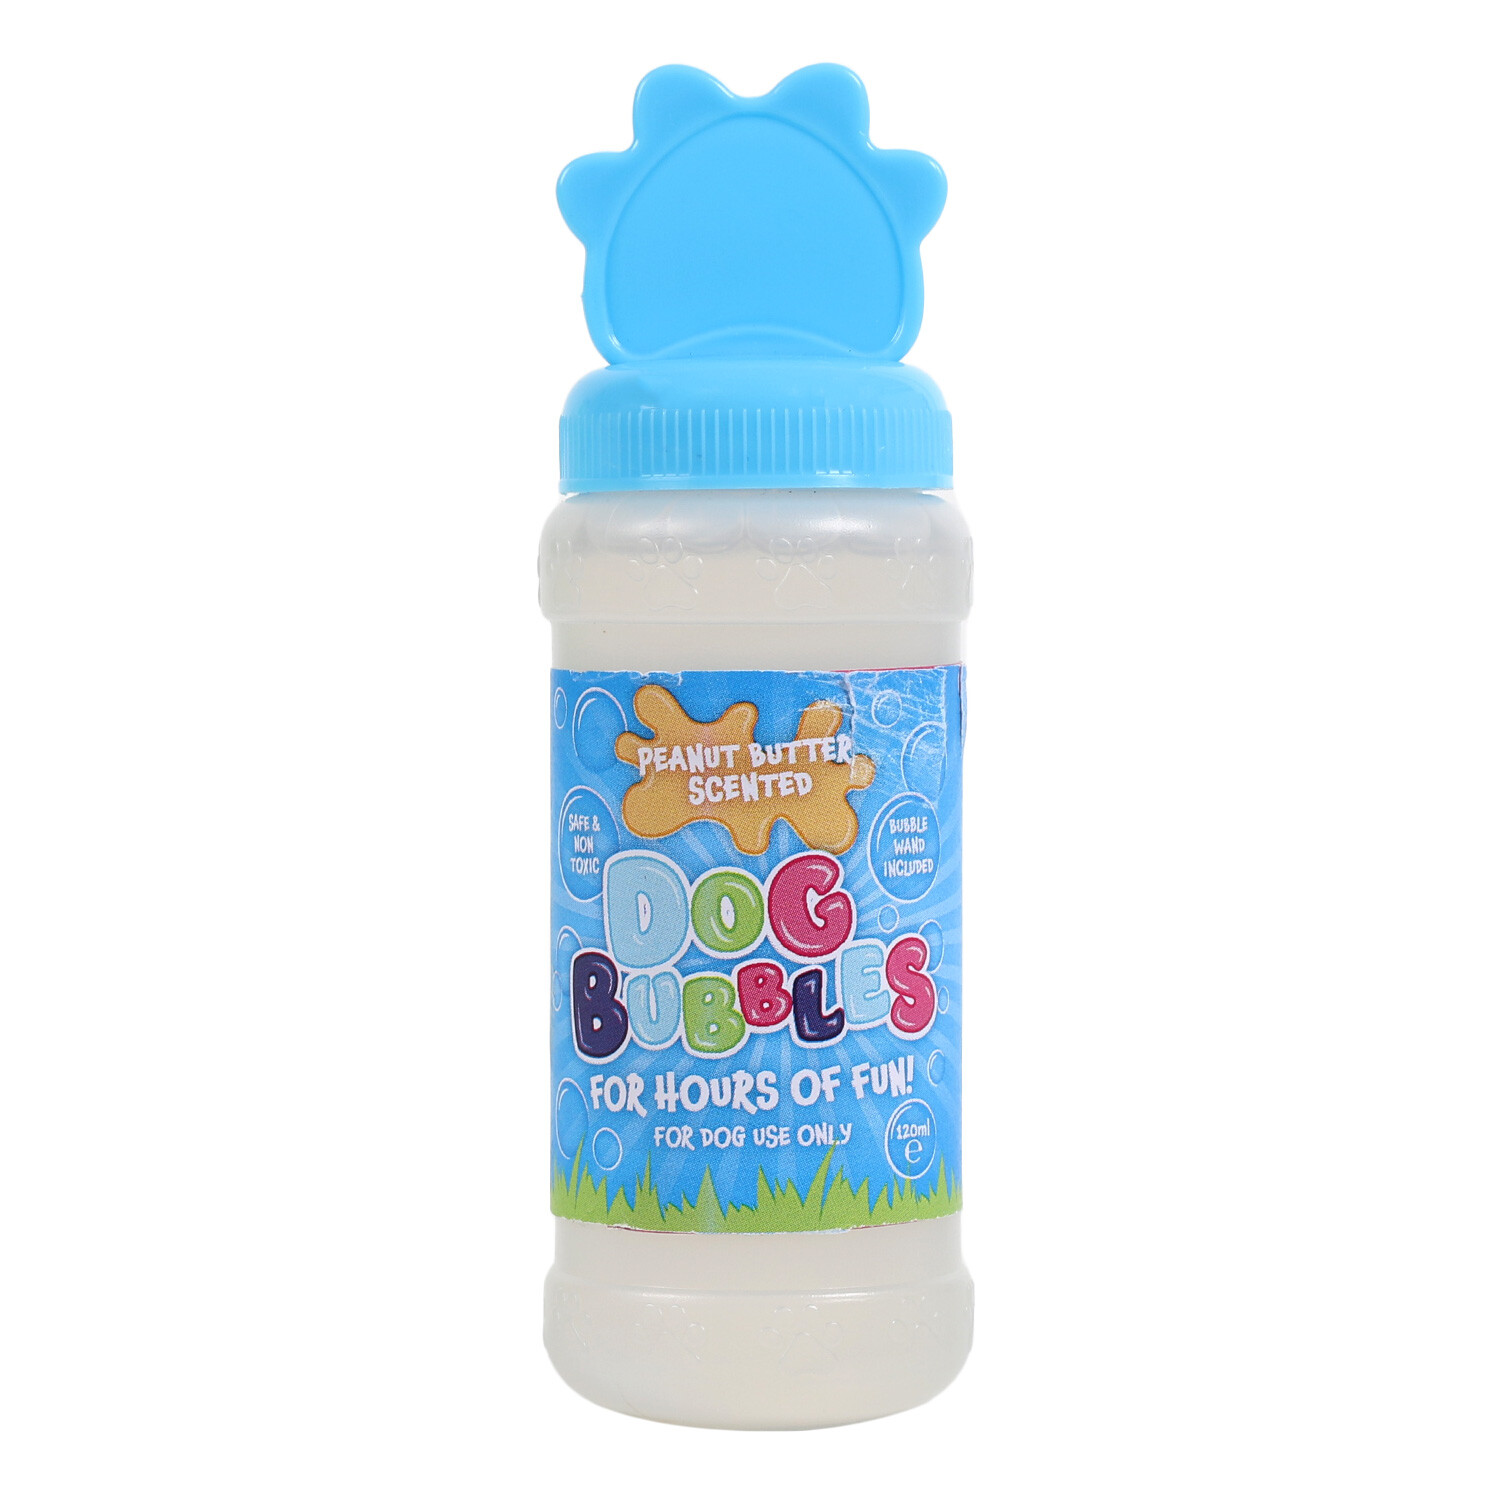 Peanut Butter Scented Dog Bubbles 120ml Image